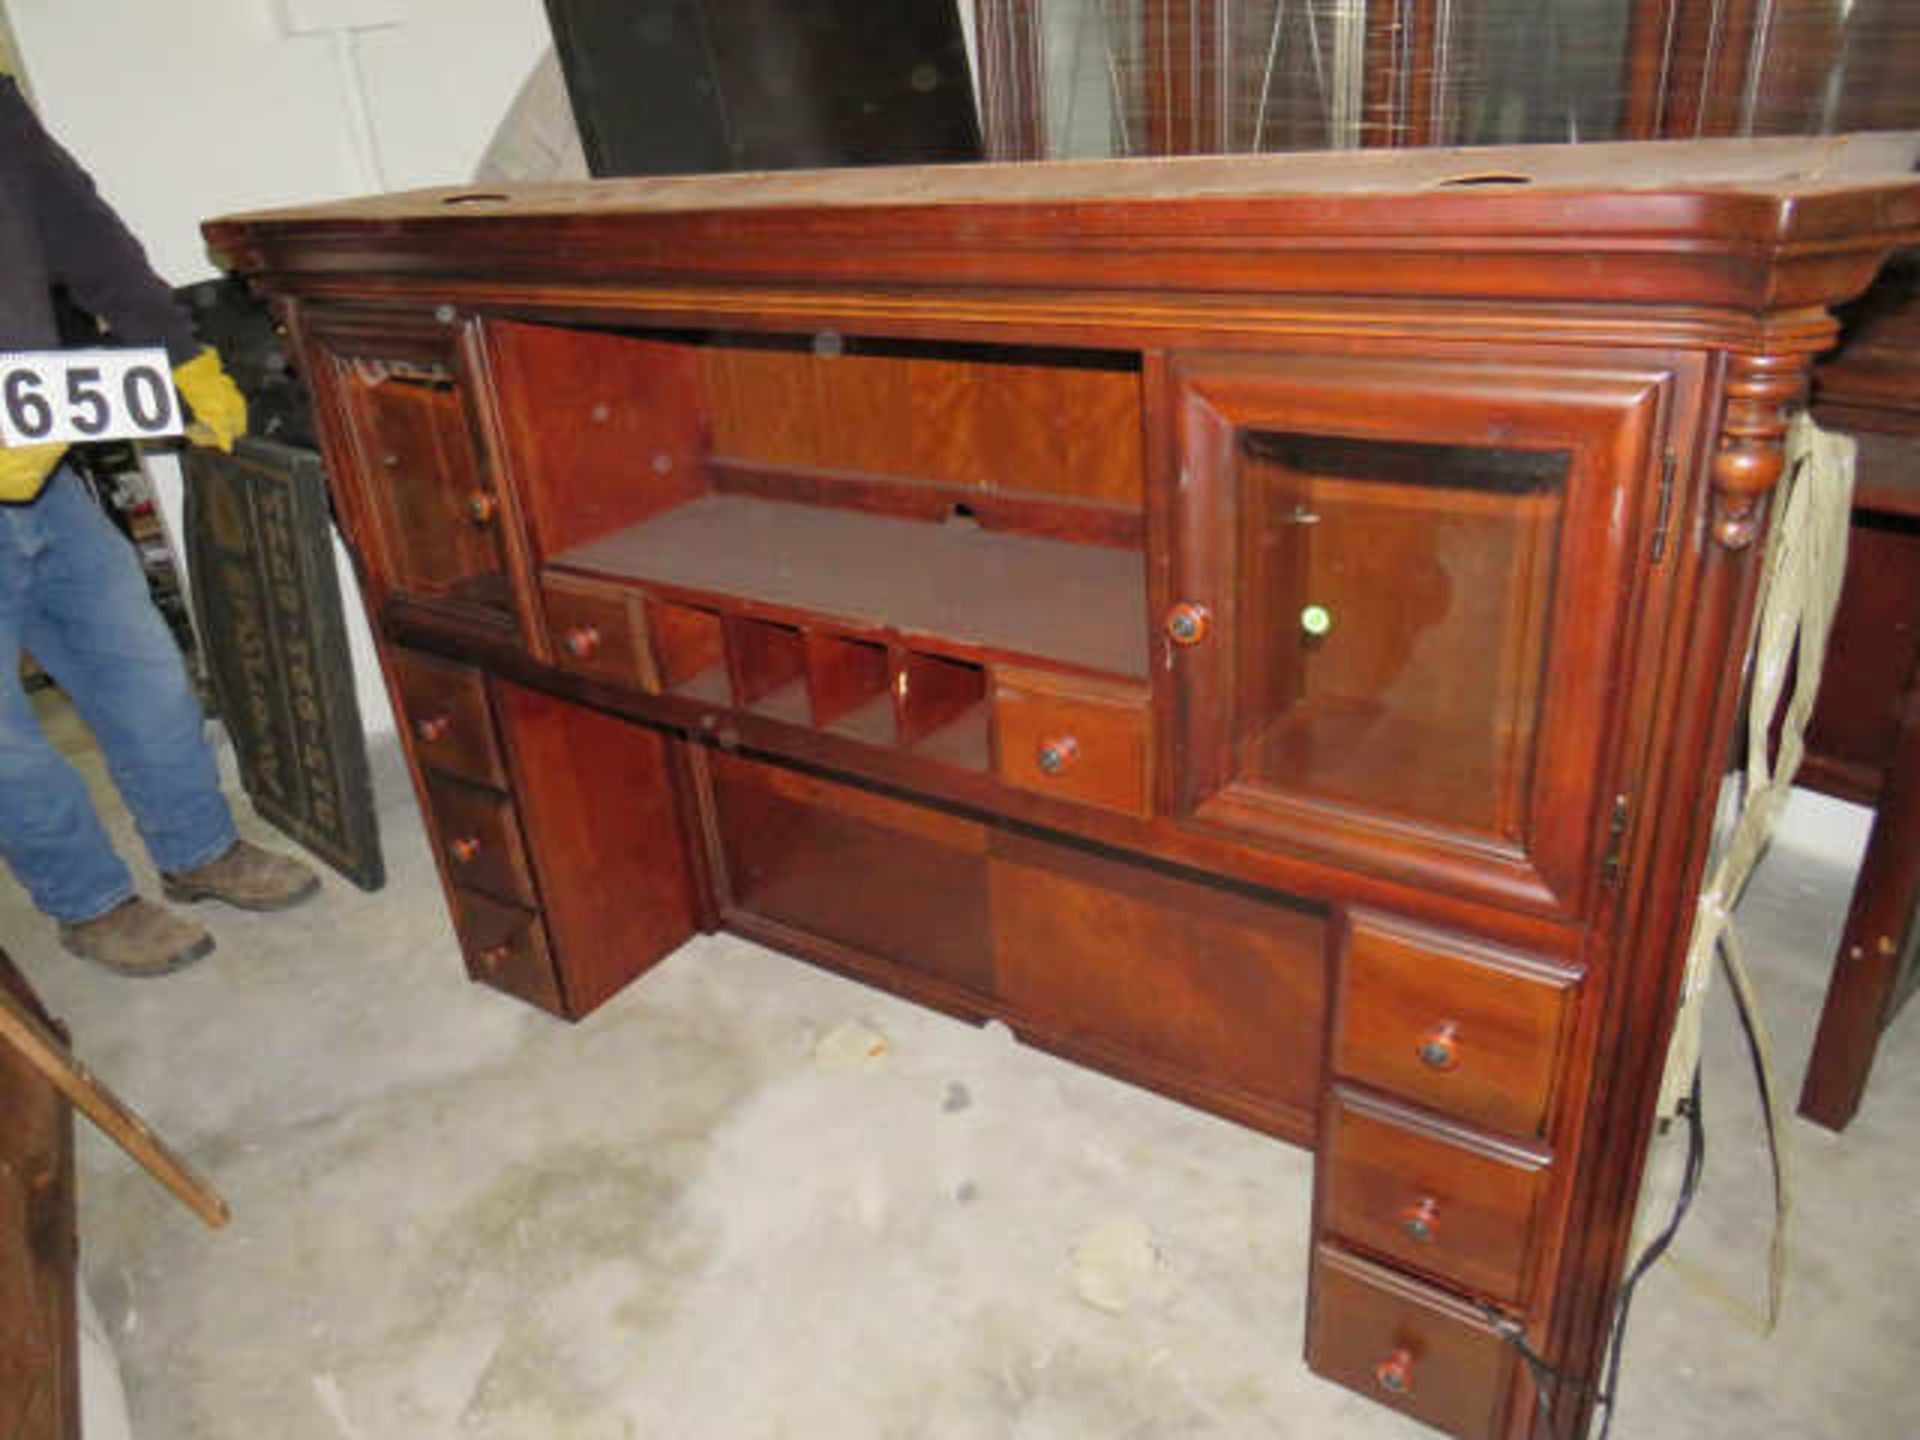 Executive wood desk, cabinet top, Cherry finish, solid wood, 68"l x 25"d x right hand side return...